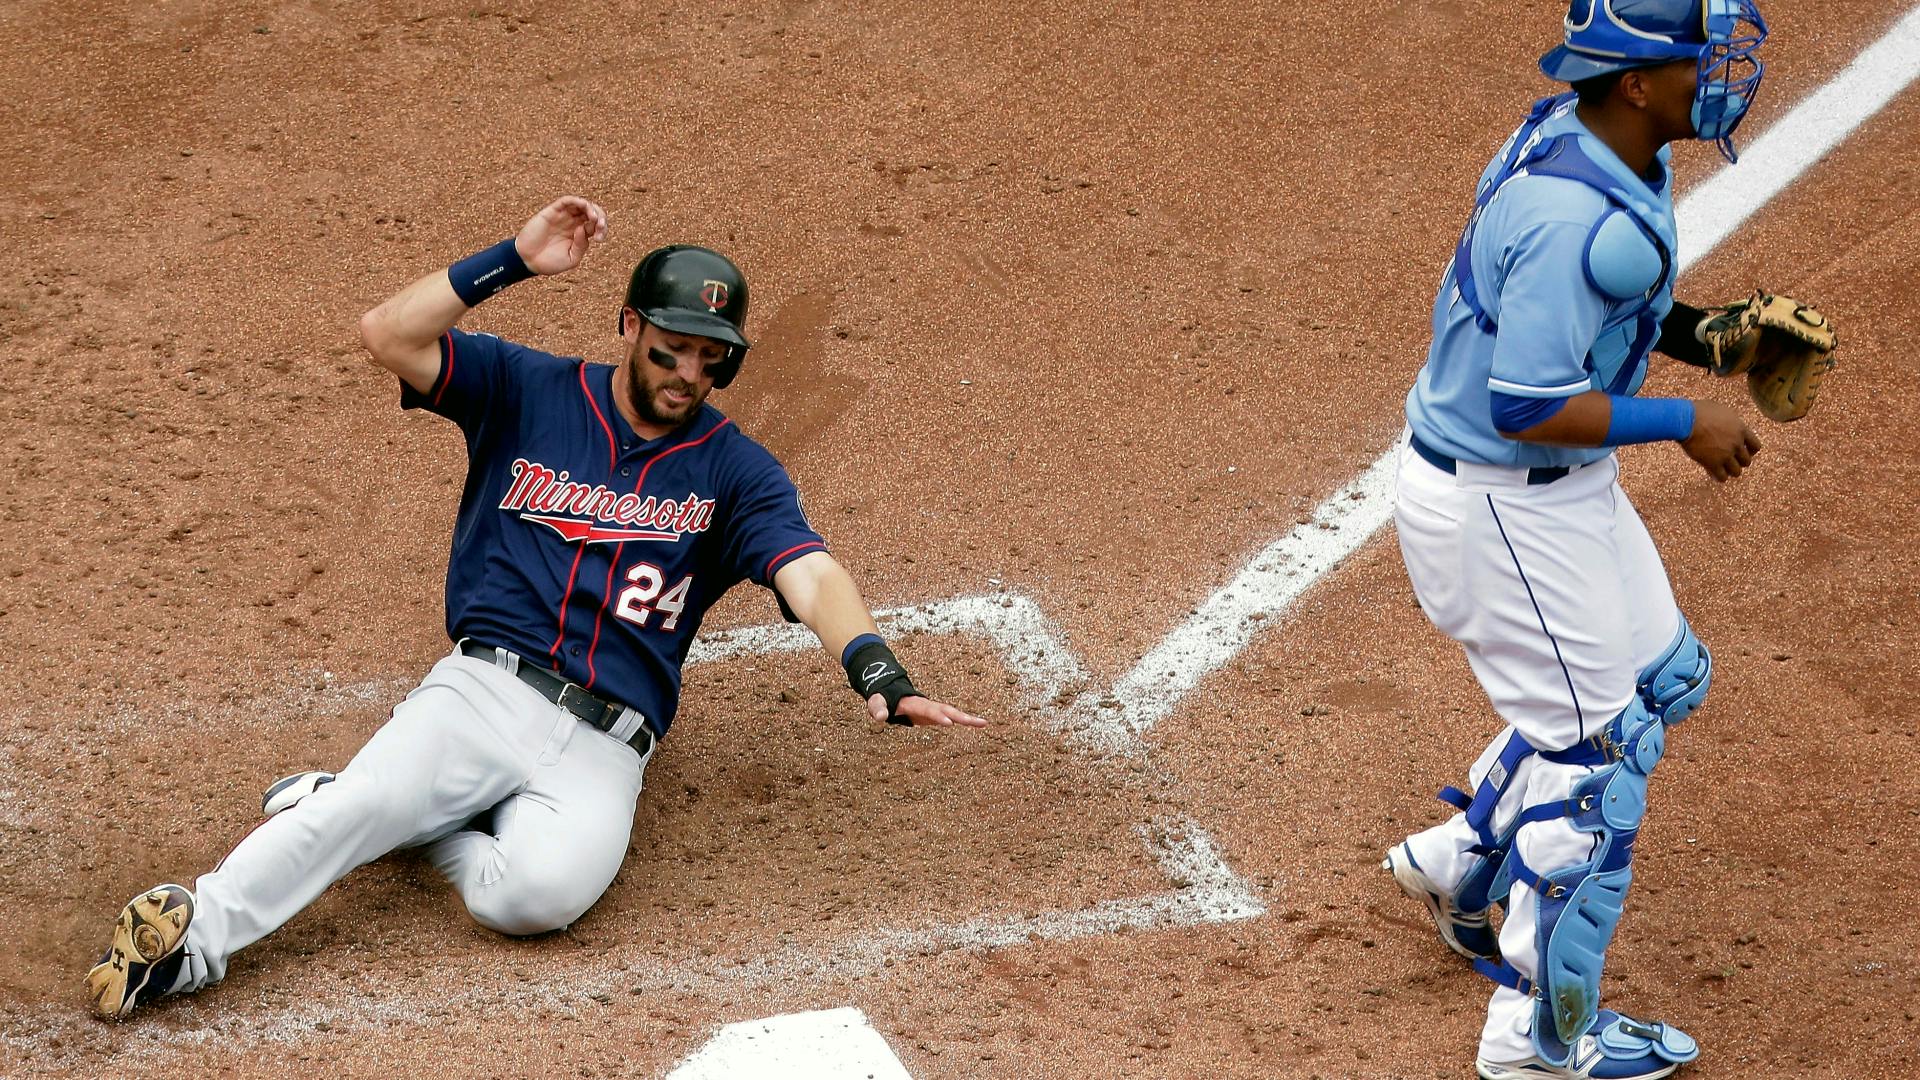 Trevor Plouffe's big day was one of many for the Twins as they avoided a Royals sweep.